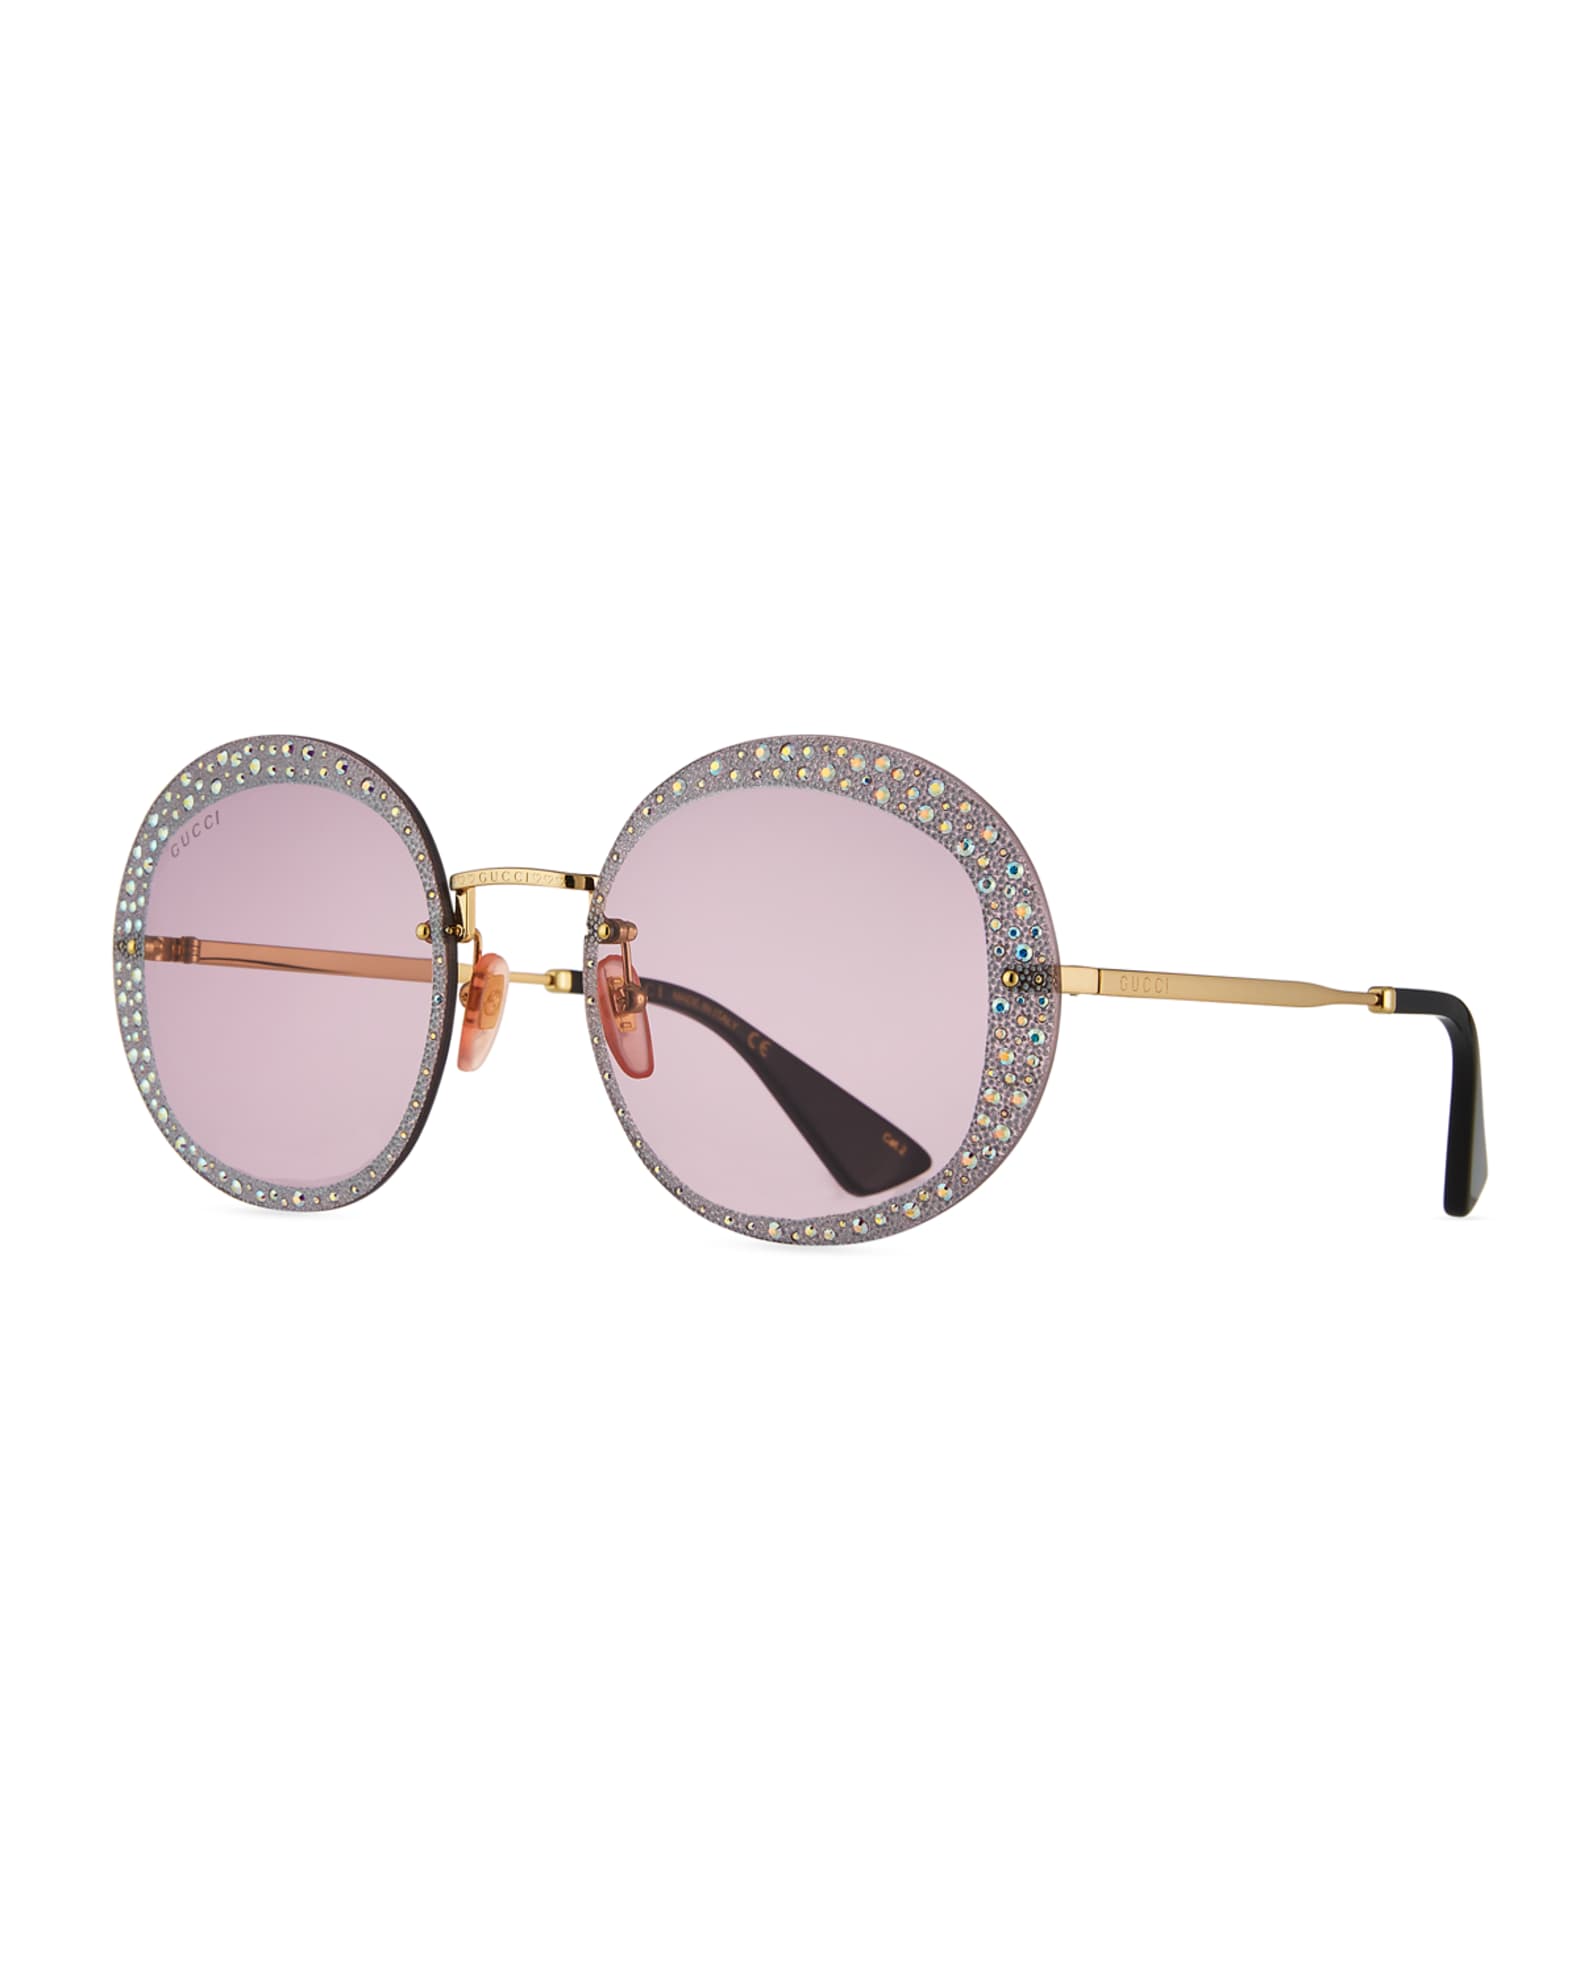 Gucci Hollywood Forever Rimless Round Metal Sunglasses With Crystals